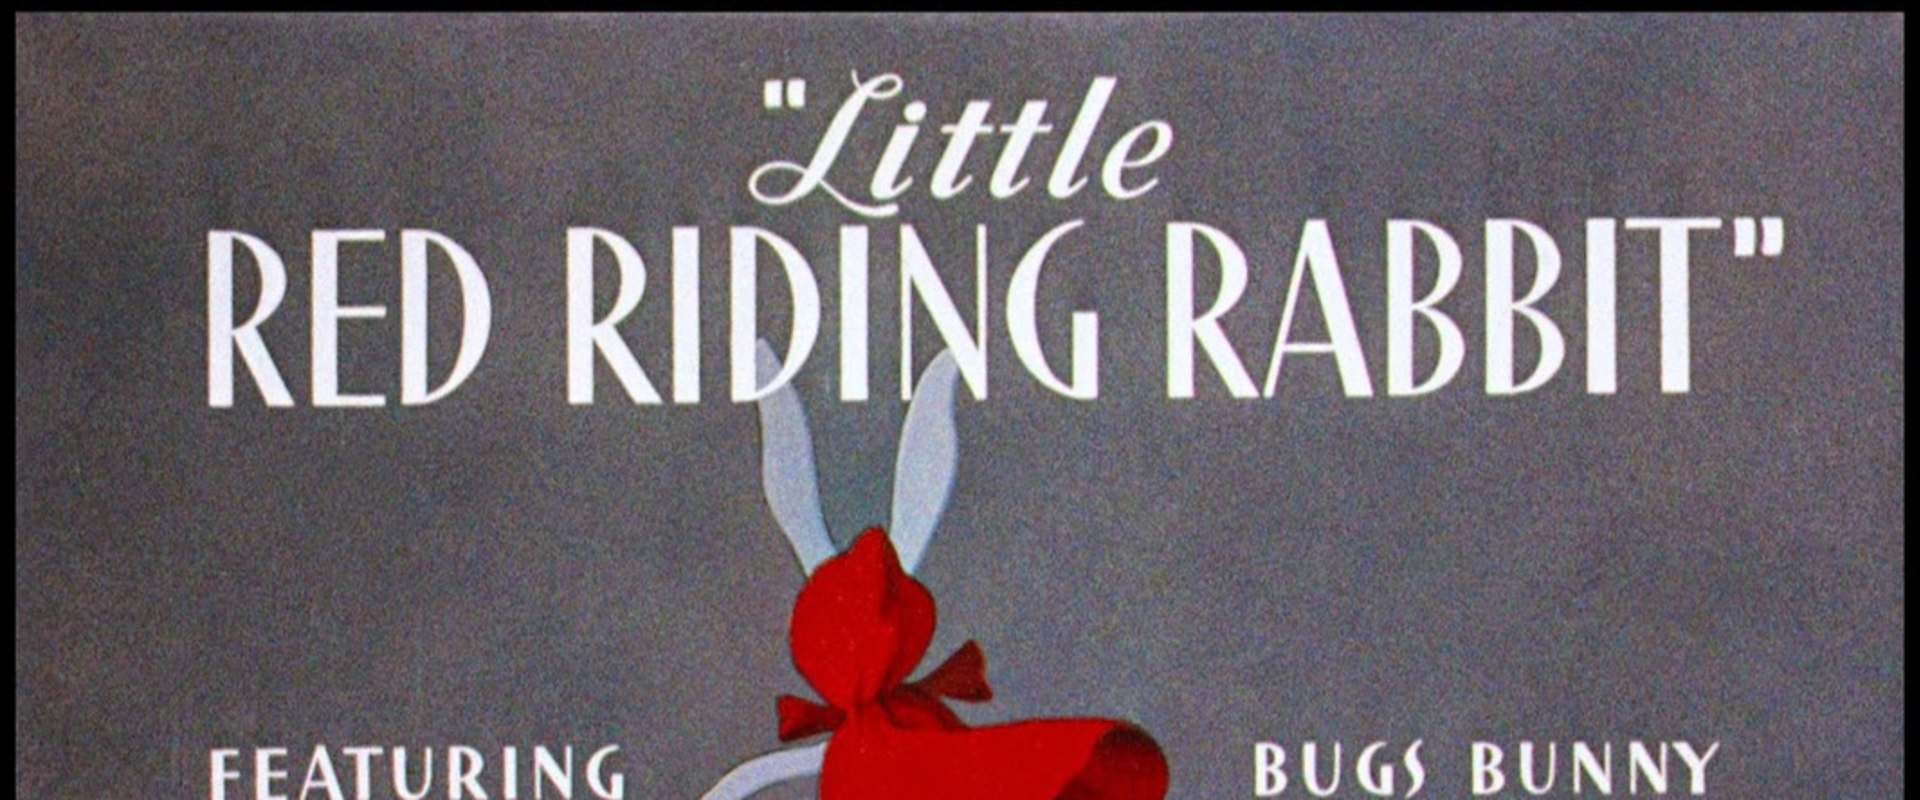 Little Red Riding Rabbit background 1